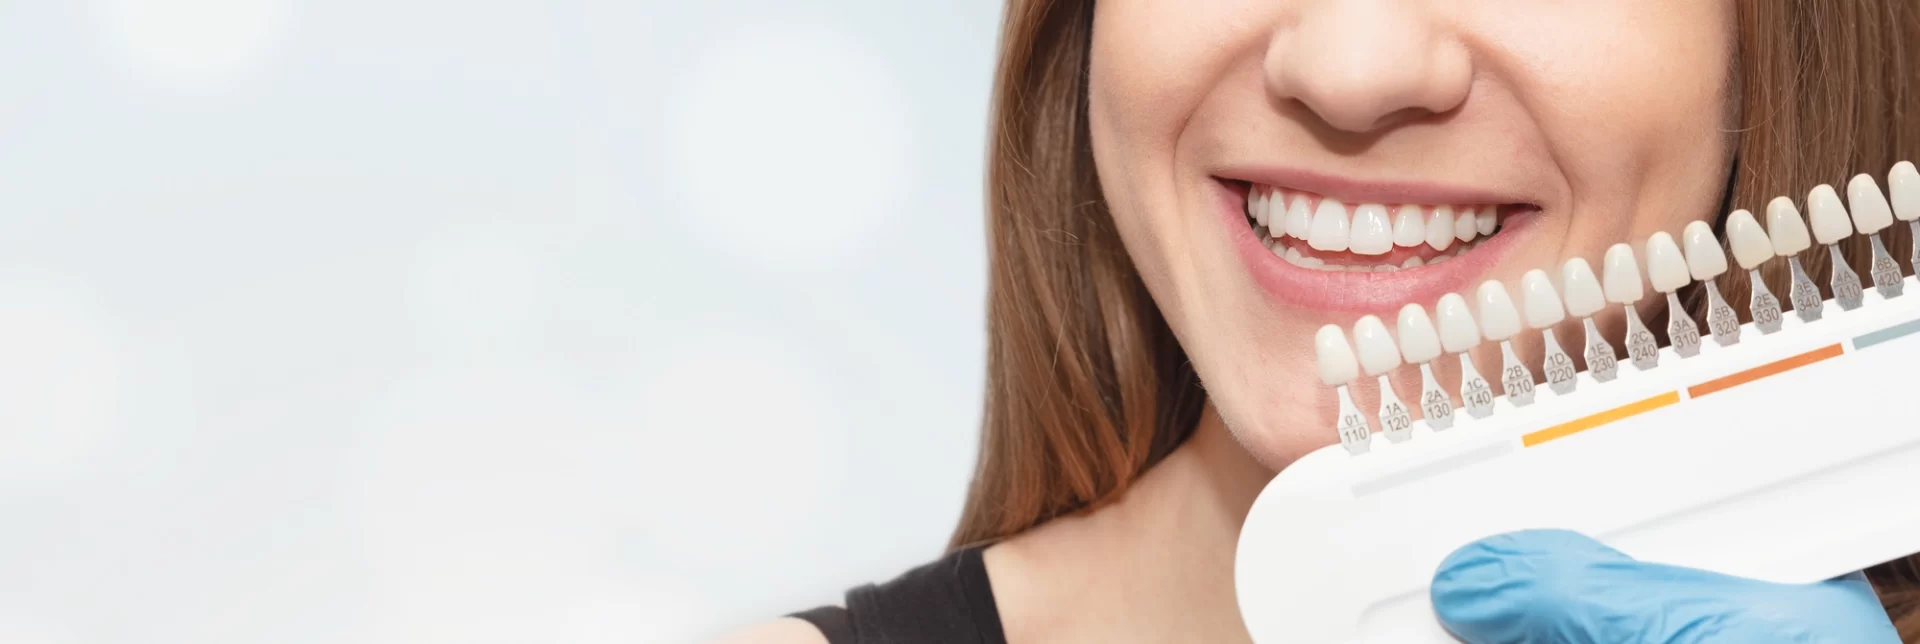 woman smiling and holding a sleeve of false teeth in different shades | Restorative Dentistry | fillings